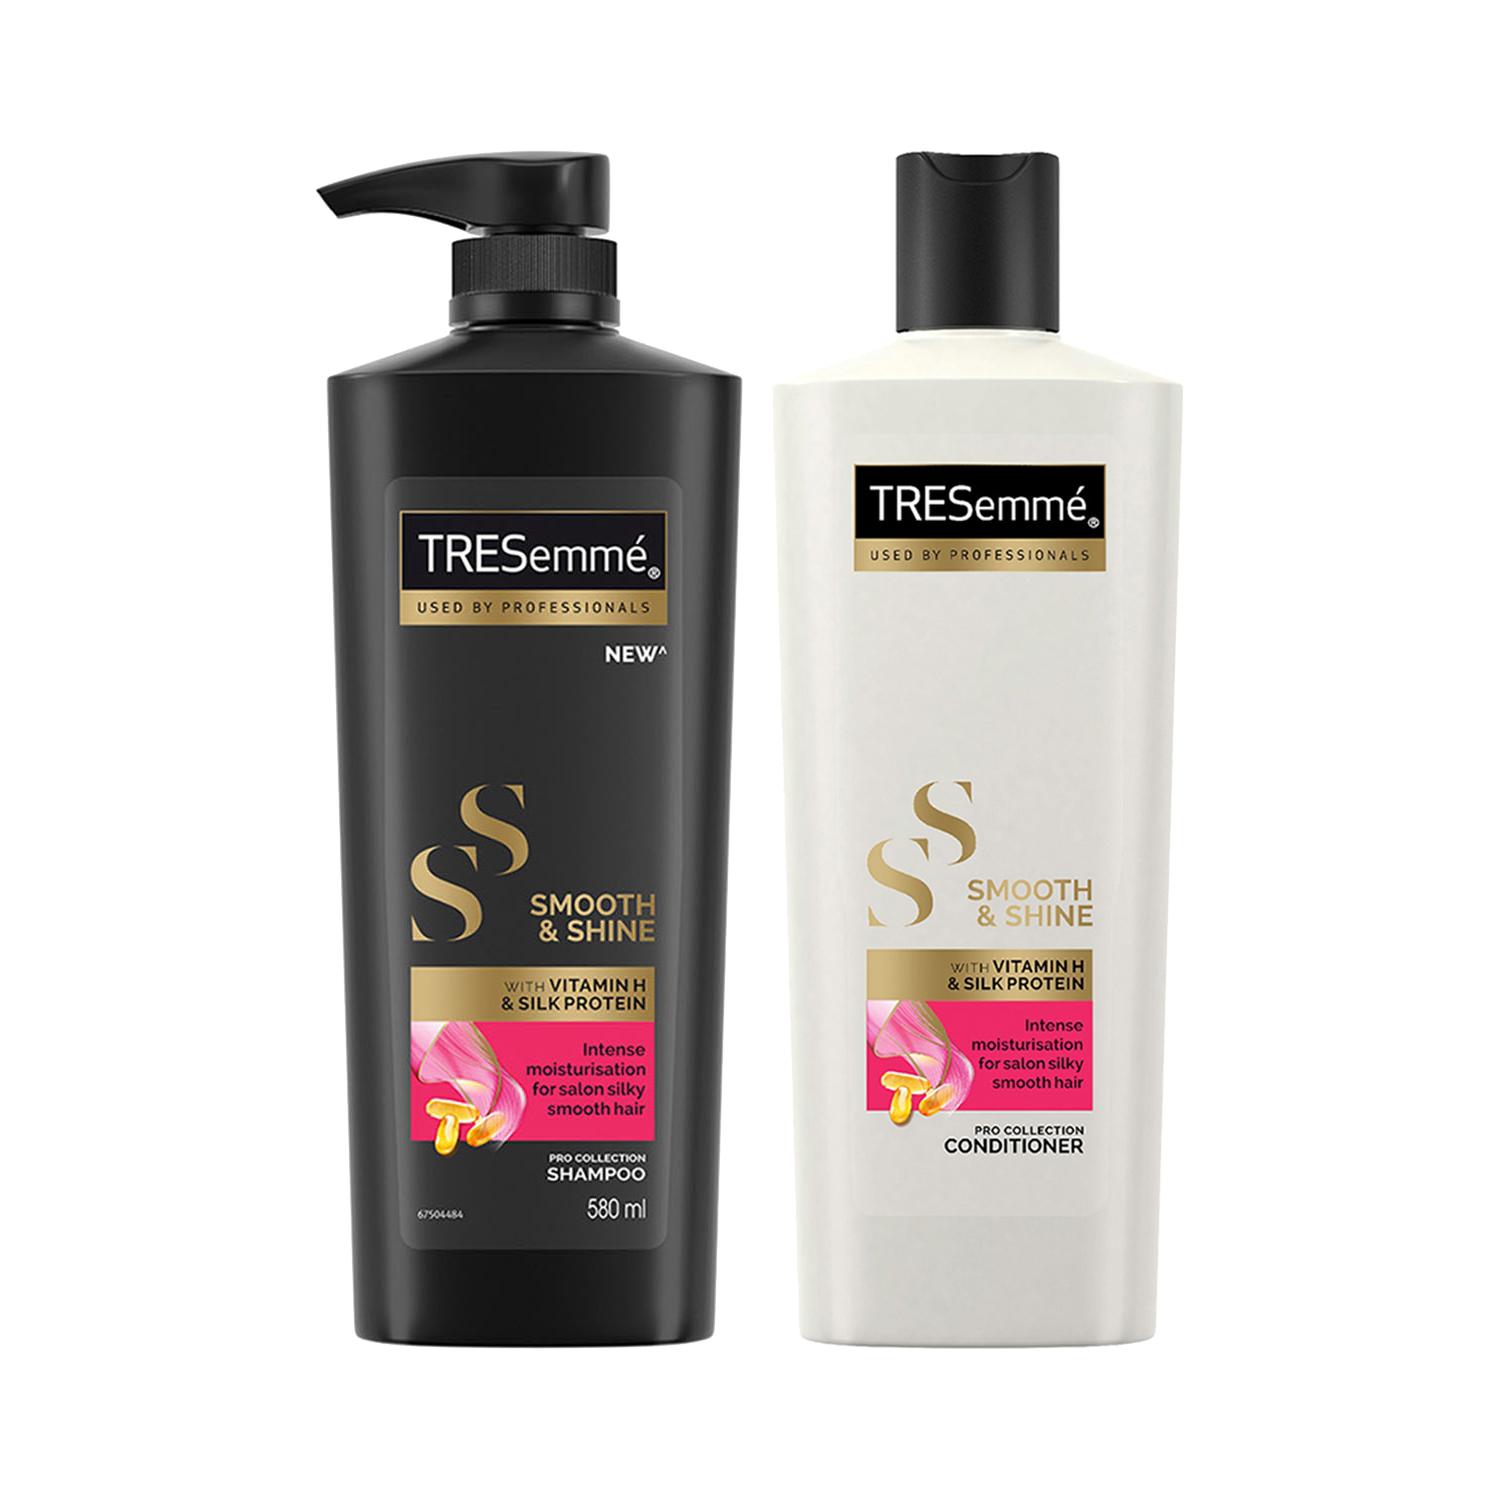 Tresemme | Tresemme Smooth & Shine Shampoo + Conditioner Combo